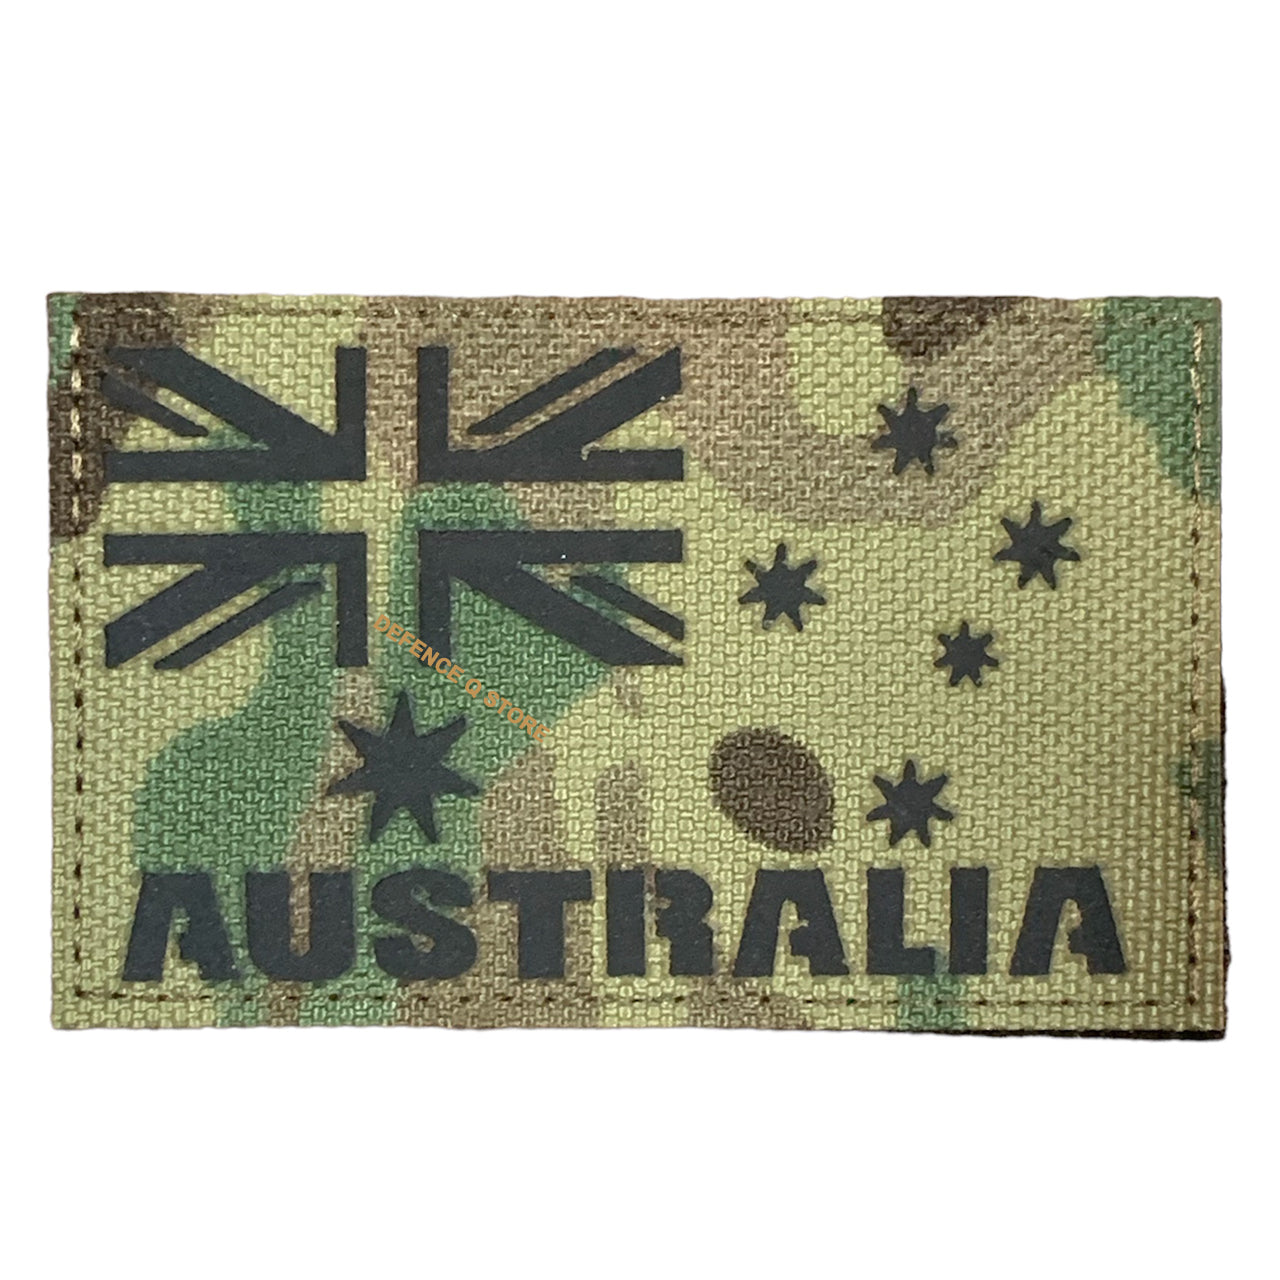 Enhance your outfit with the Australian National Flag Multicam Laser Cut Hook &amp; Loop Patch. Measuring 5cm X 8cm, it adds a charming touch to your jacket, pack, or cap. Display your patriotic spirit in a stylish and compelling manner! www.moralepatches.com.au